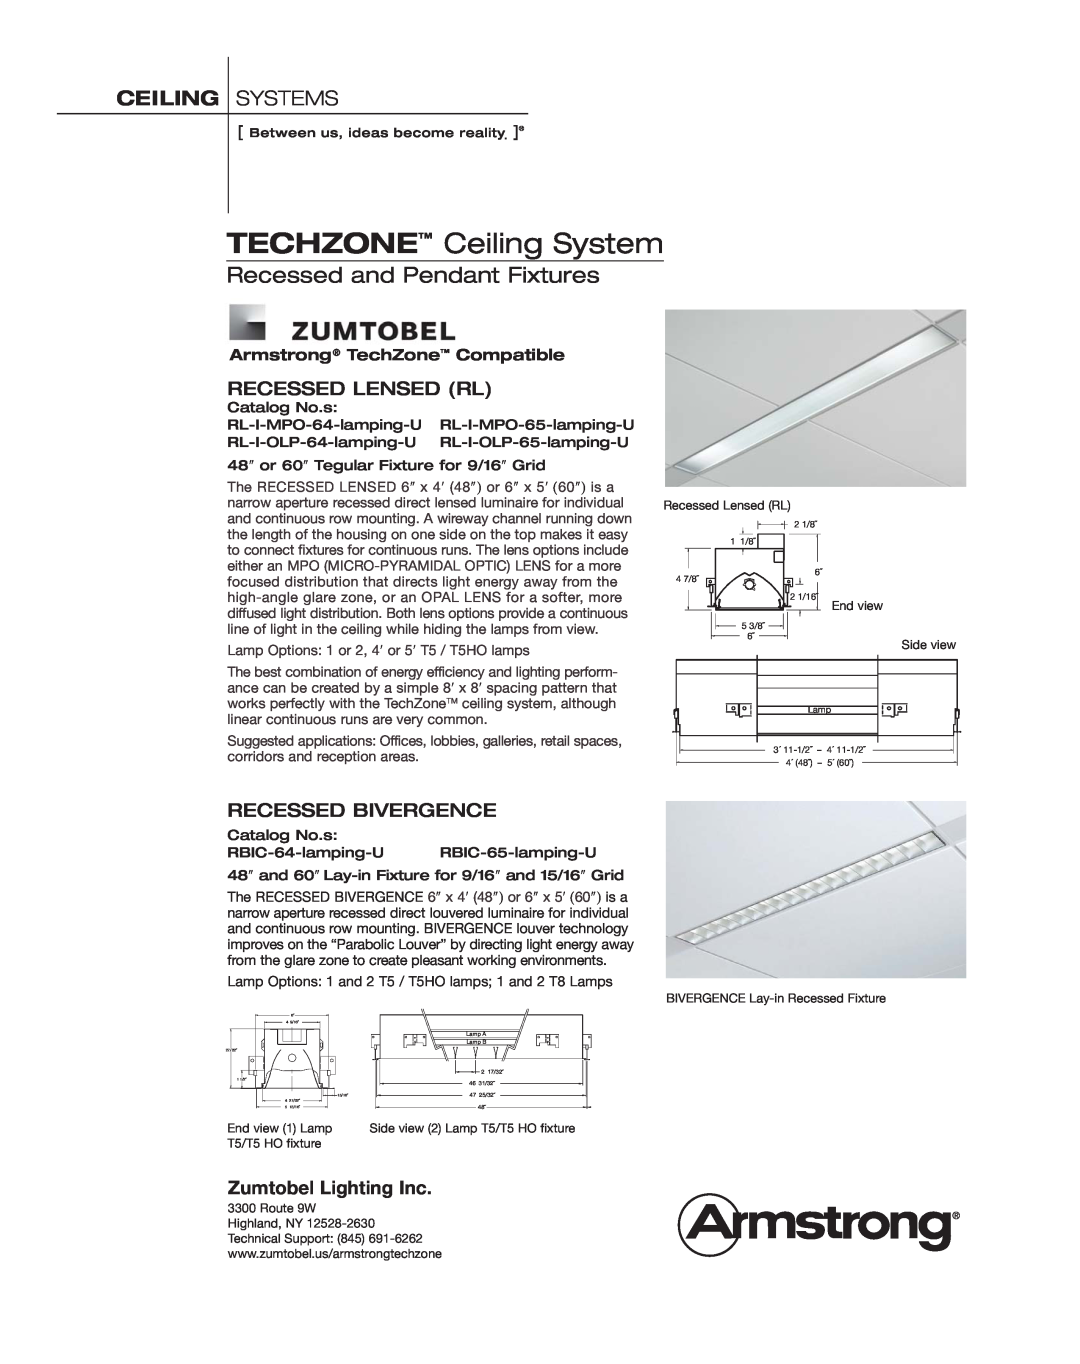 Armstrong World Industries Ceiling Lighting System manual TECHZONE Ceiling System, Recessed and Pendant Fixtures 